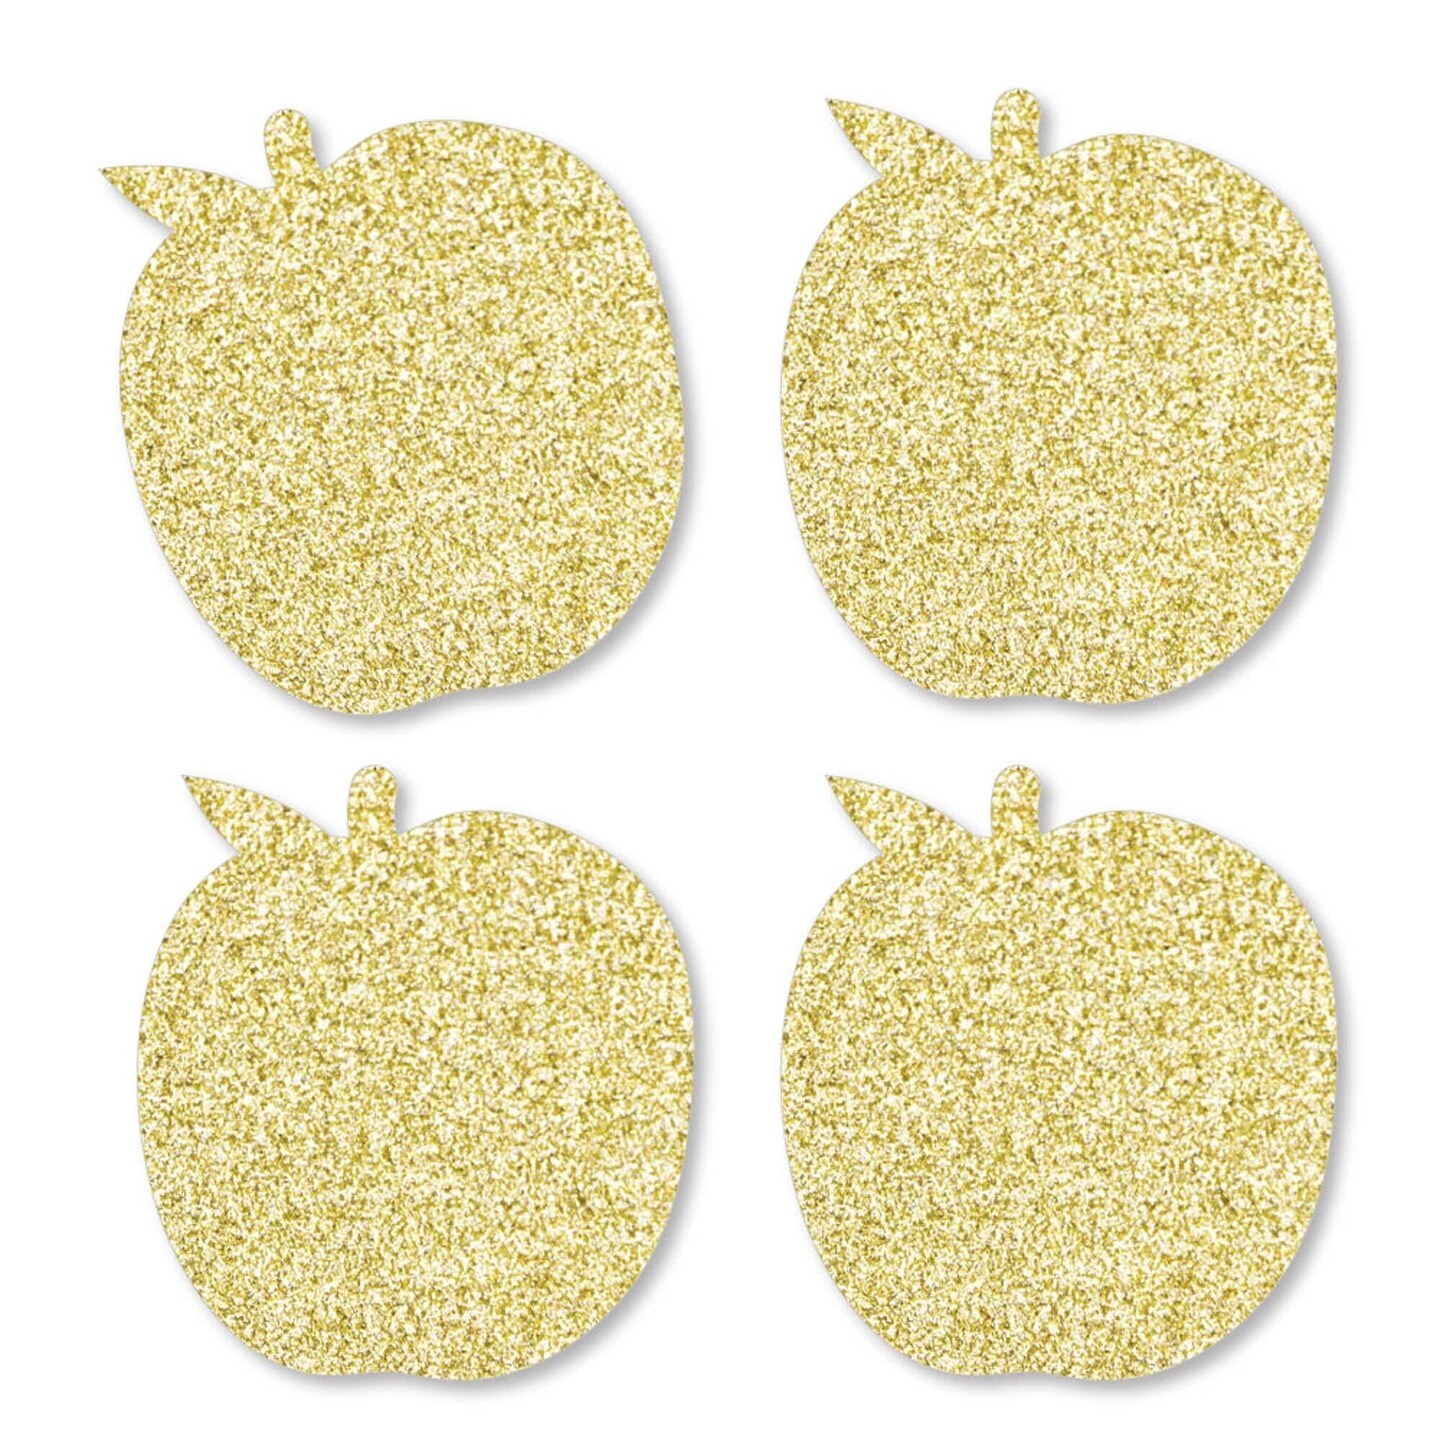 Big Dot of Happiness Gold Glitter Apple - No-Mess Real Gold Glitter Cut-Outs - New Year Confetti - Set of 24